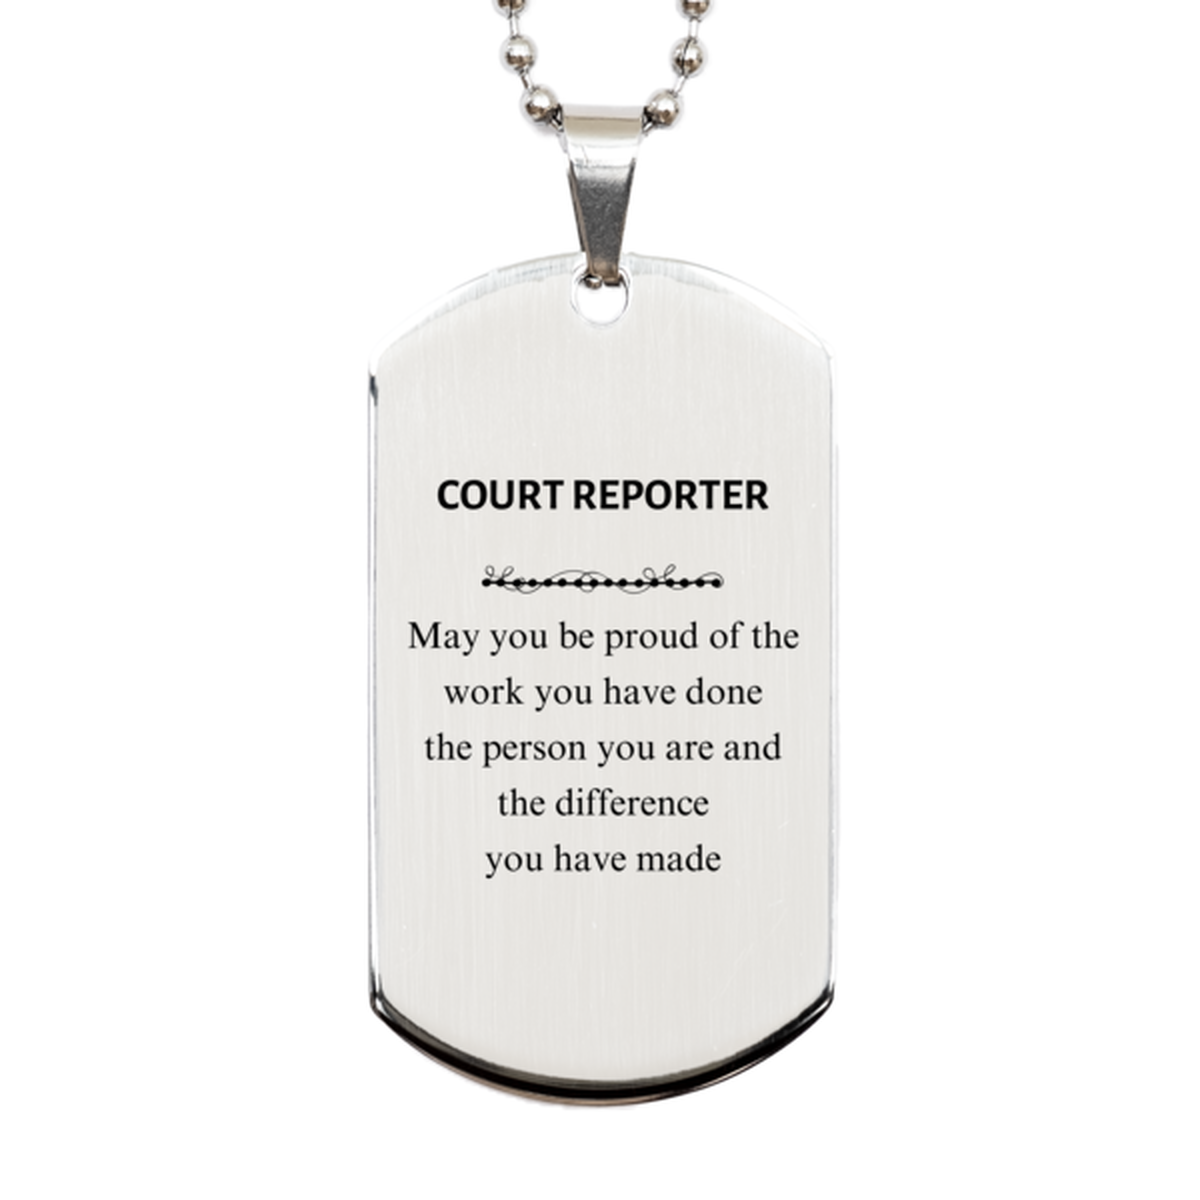 Court Reporter May you be proud of the work you have done, Retirement Court Reporter Silver Dog Tag for Colleague Appreciation Gifts Amazing for Court Reporter